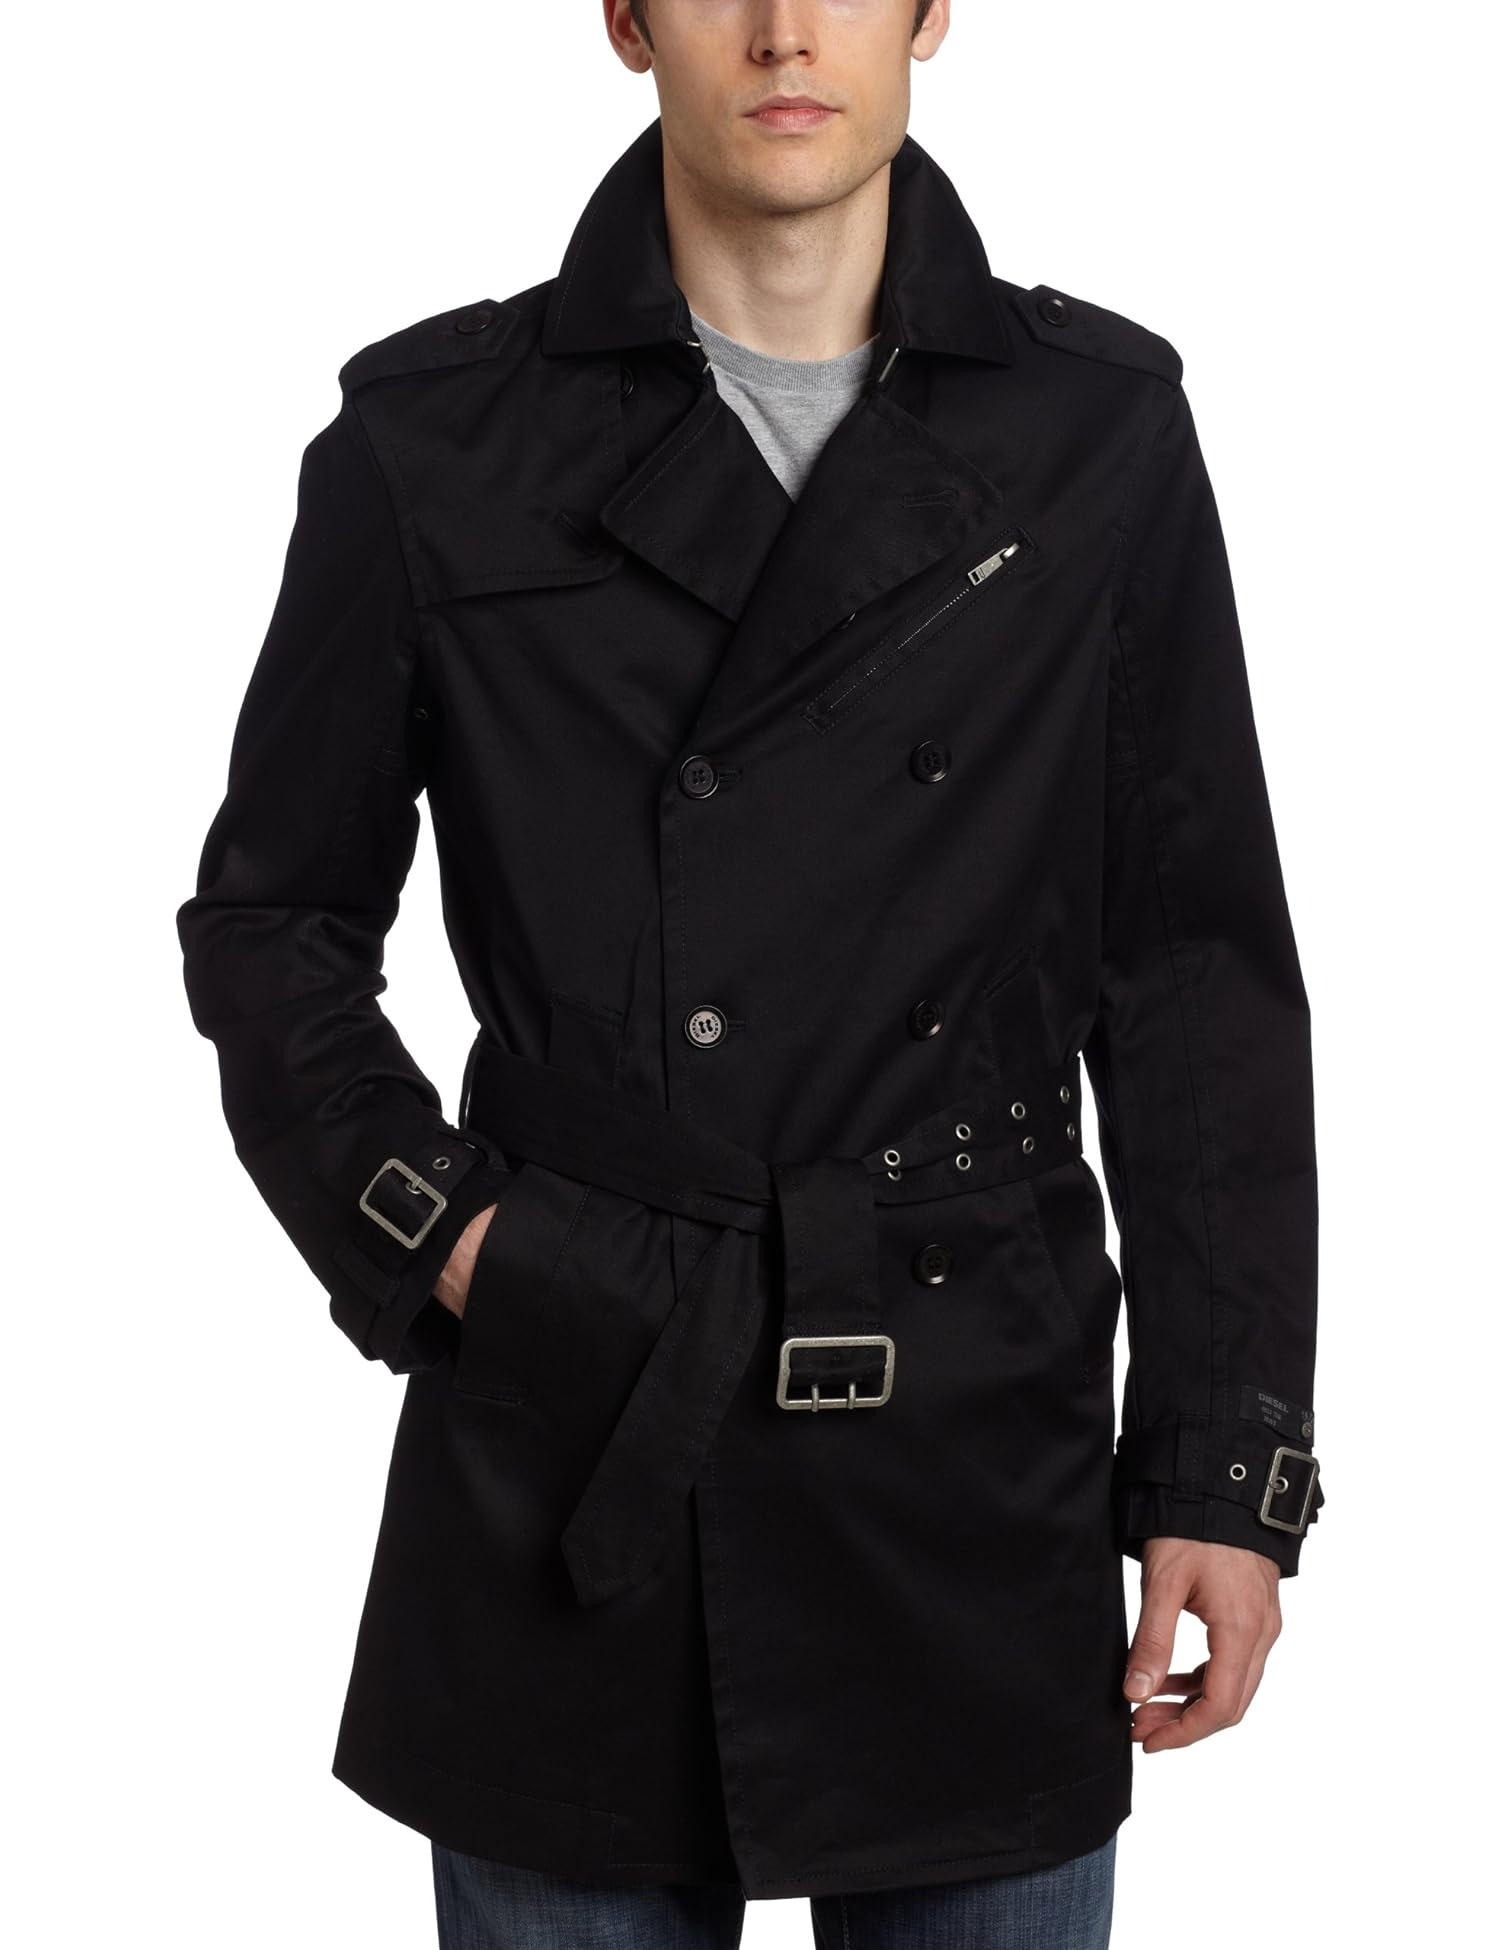 Urban Men's Guide: Men's Outerwear We Recommend for this Winter